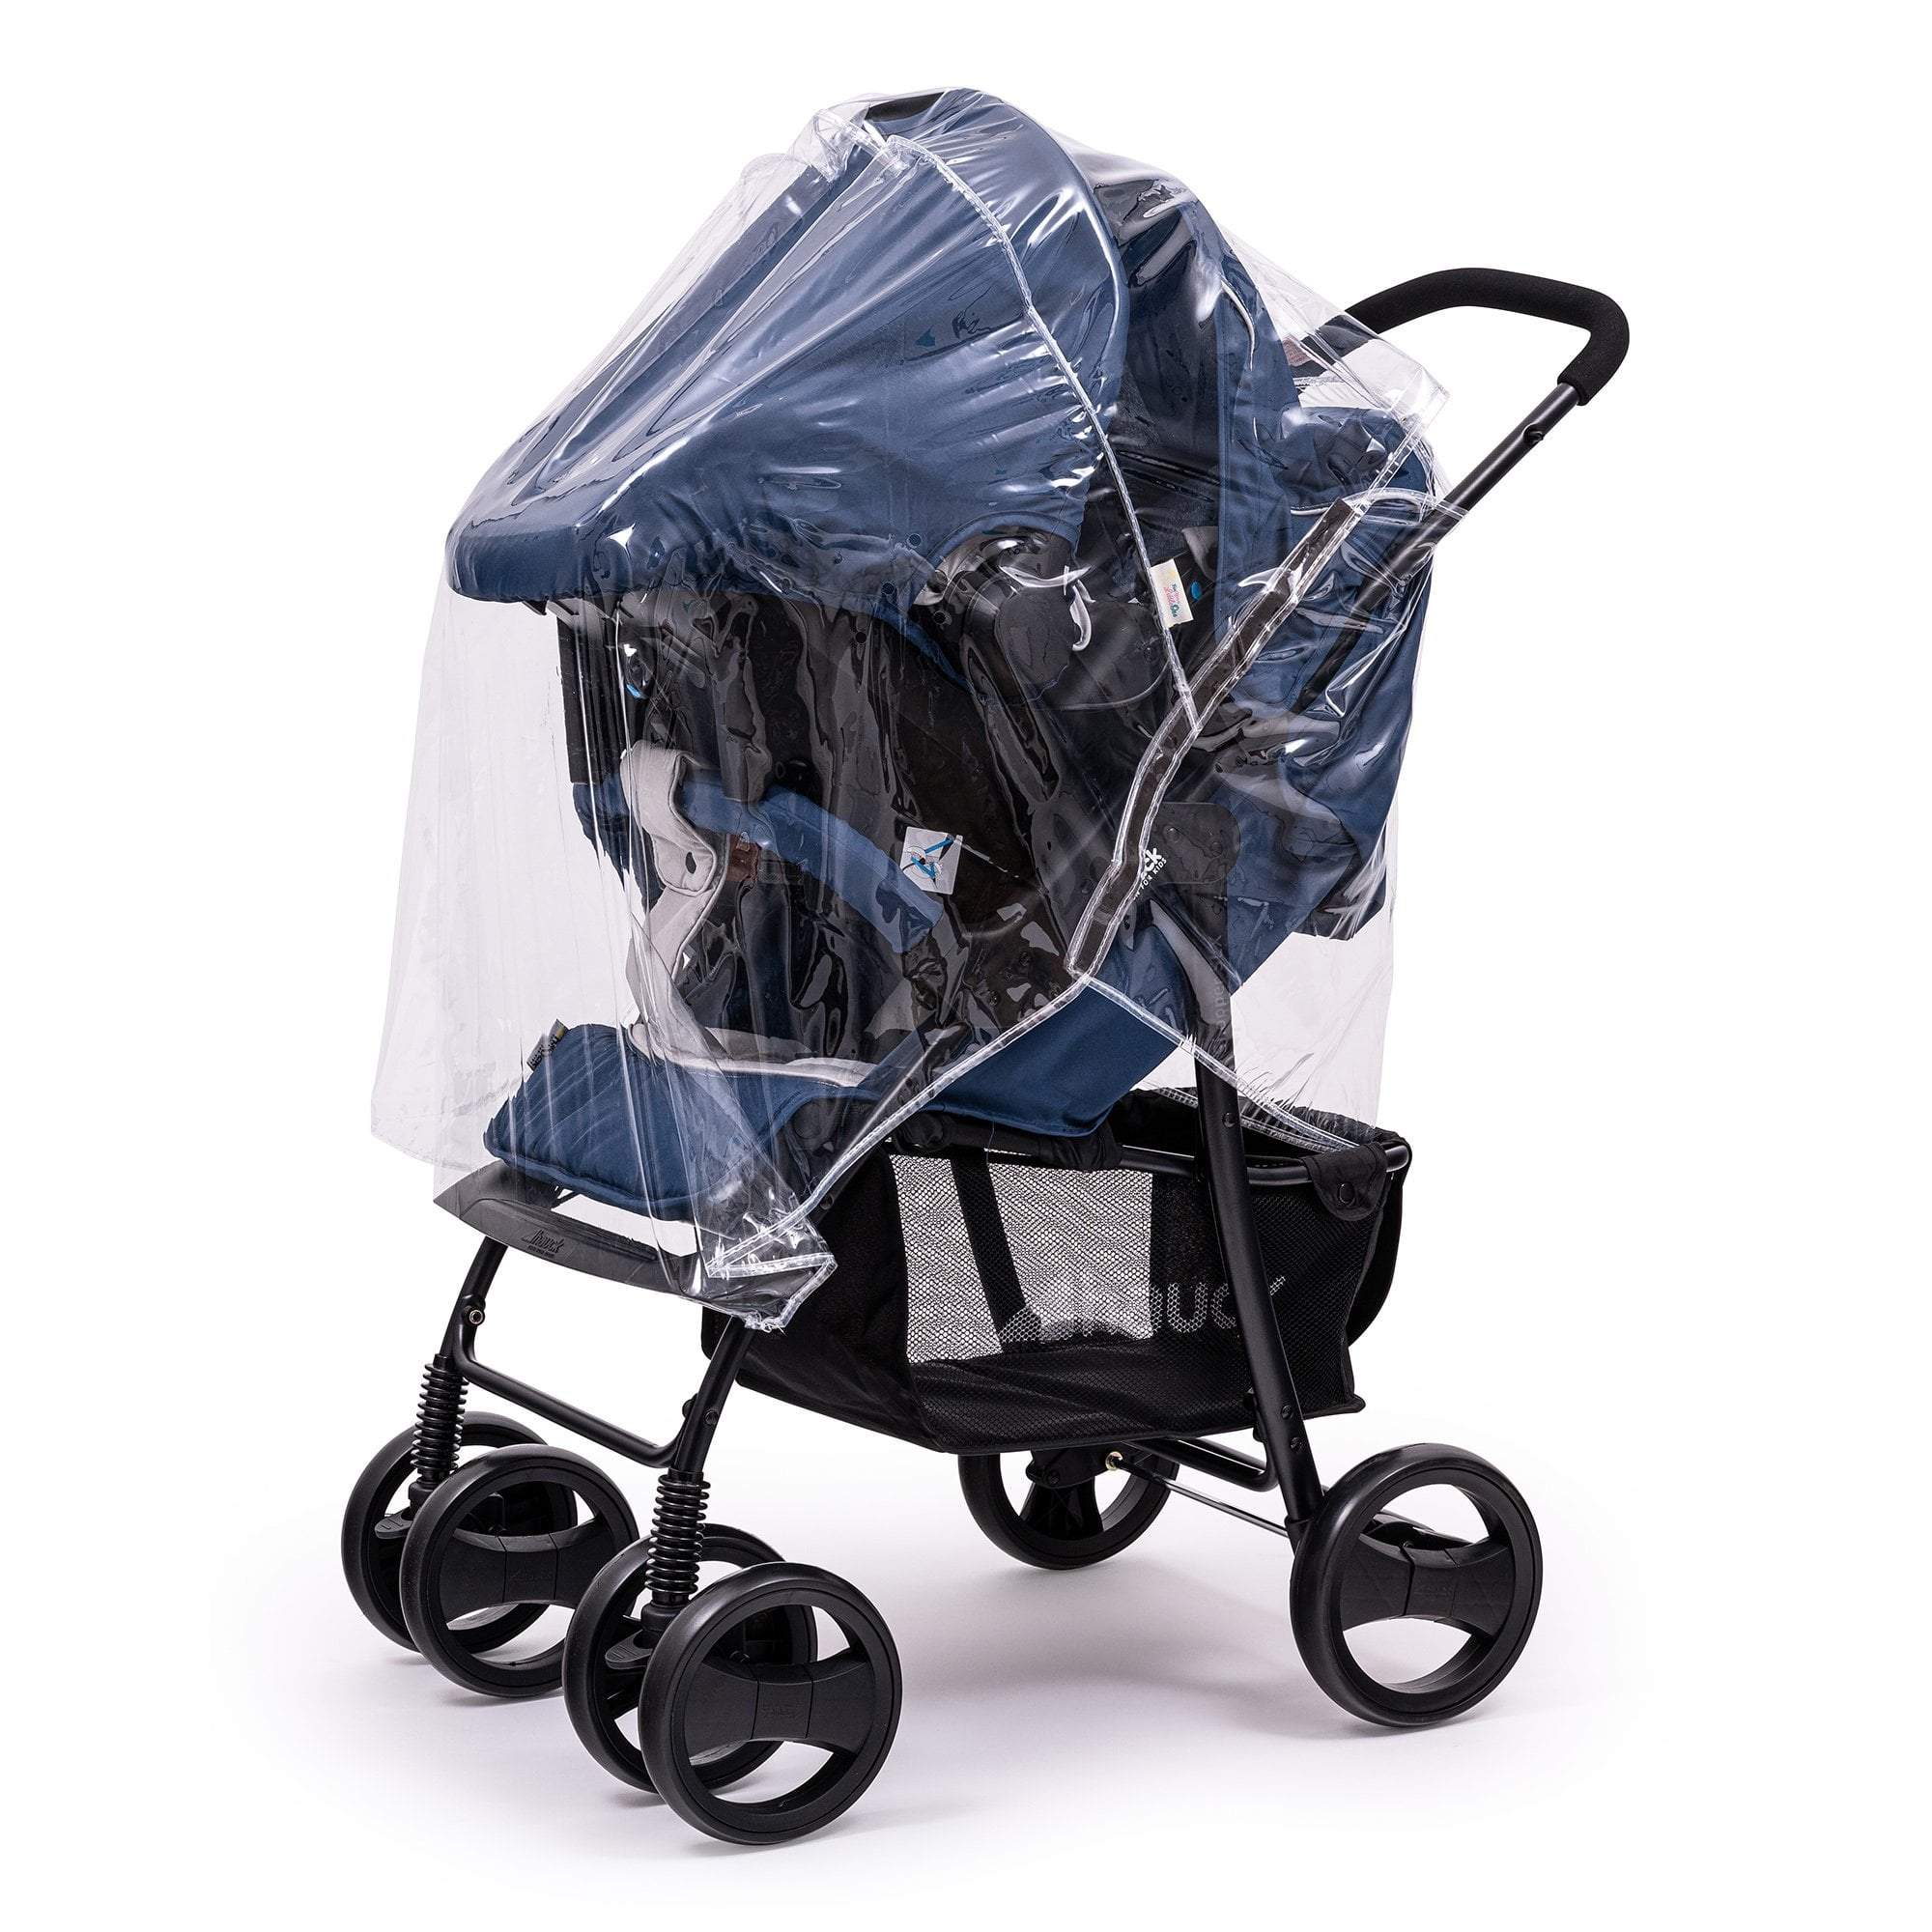 Travel System Raincover Compatible with Doona - Fits All Models - For Your Little One